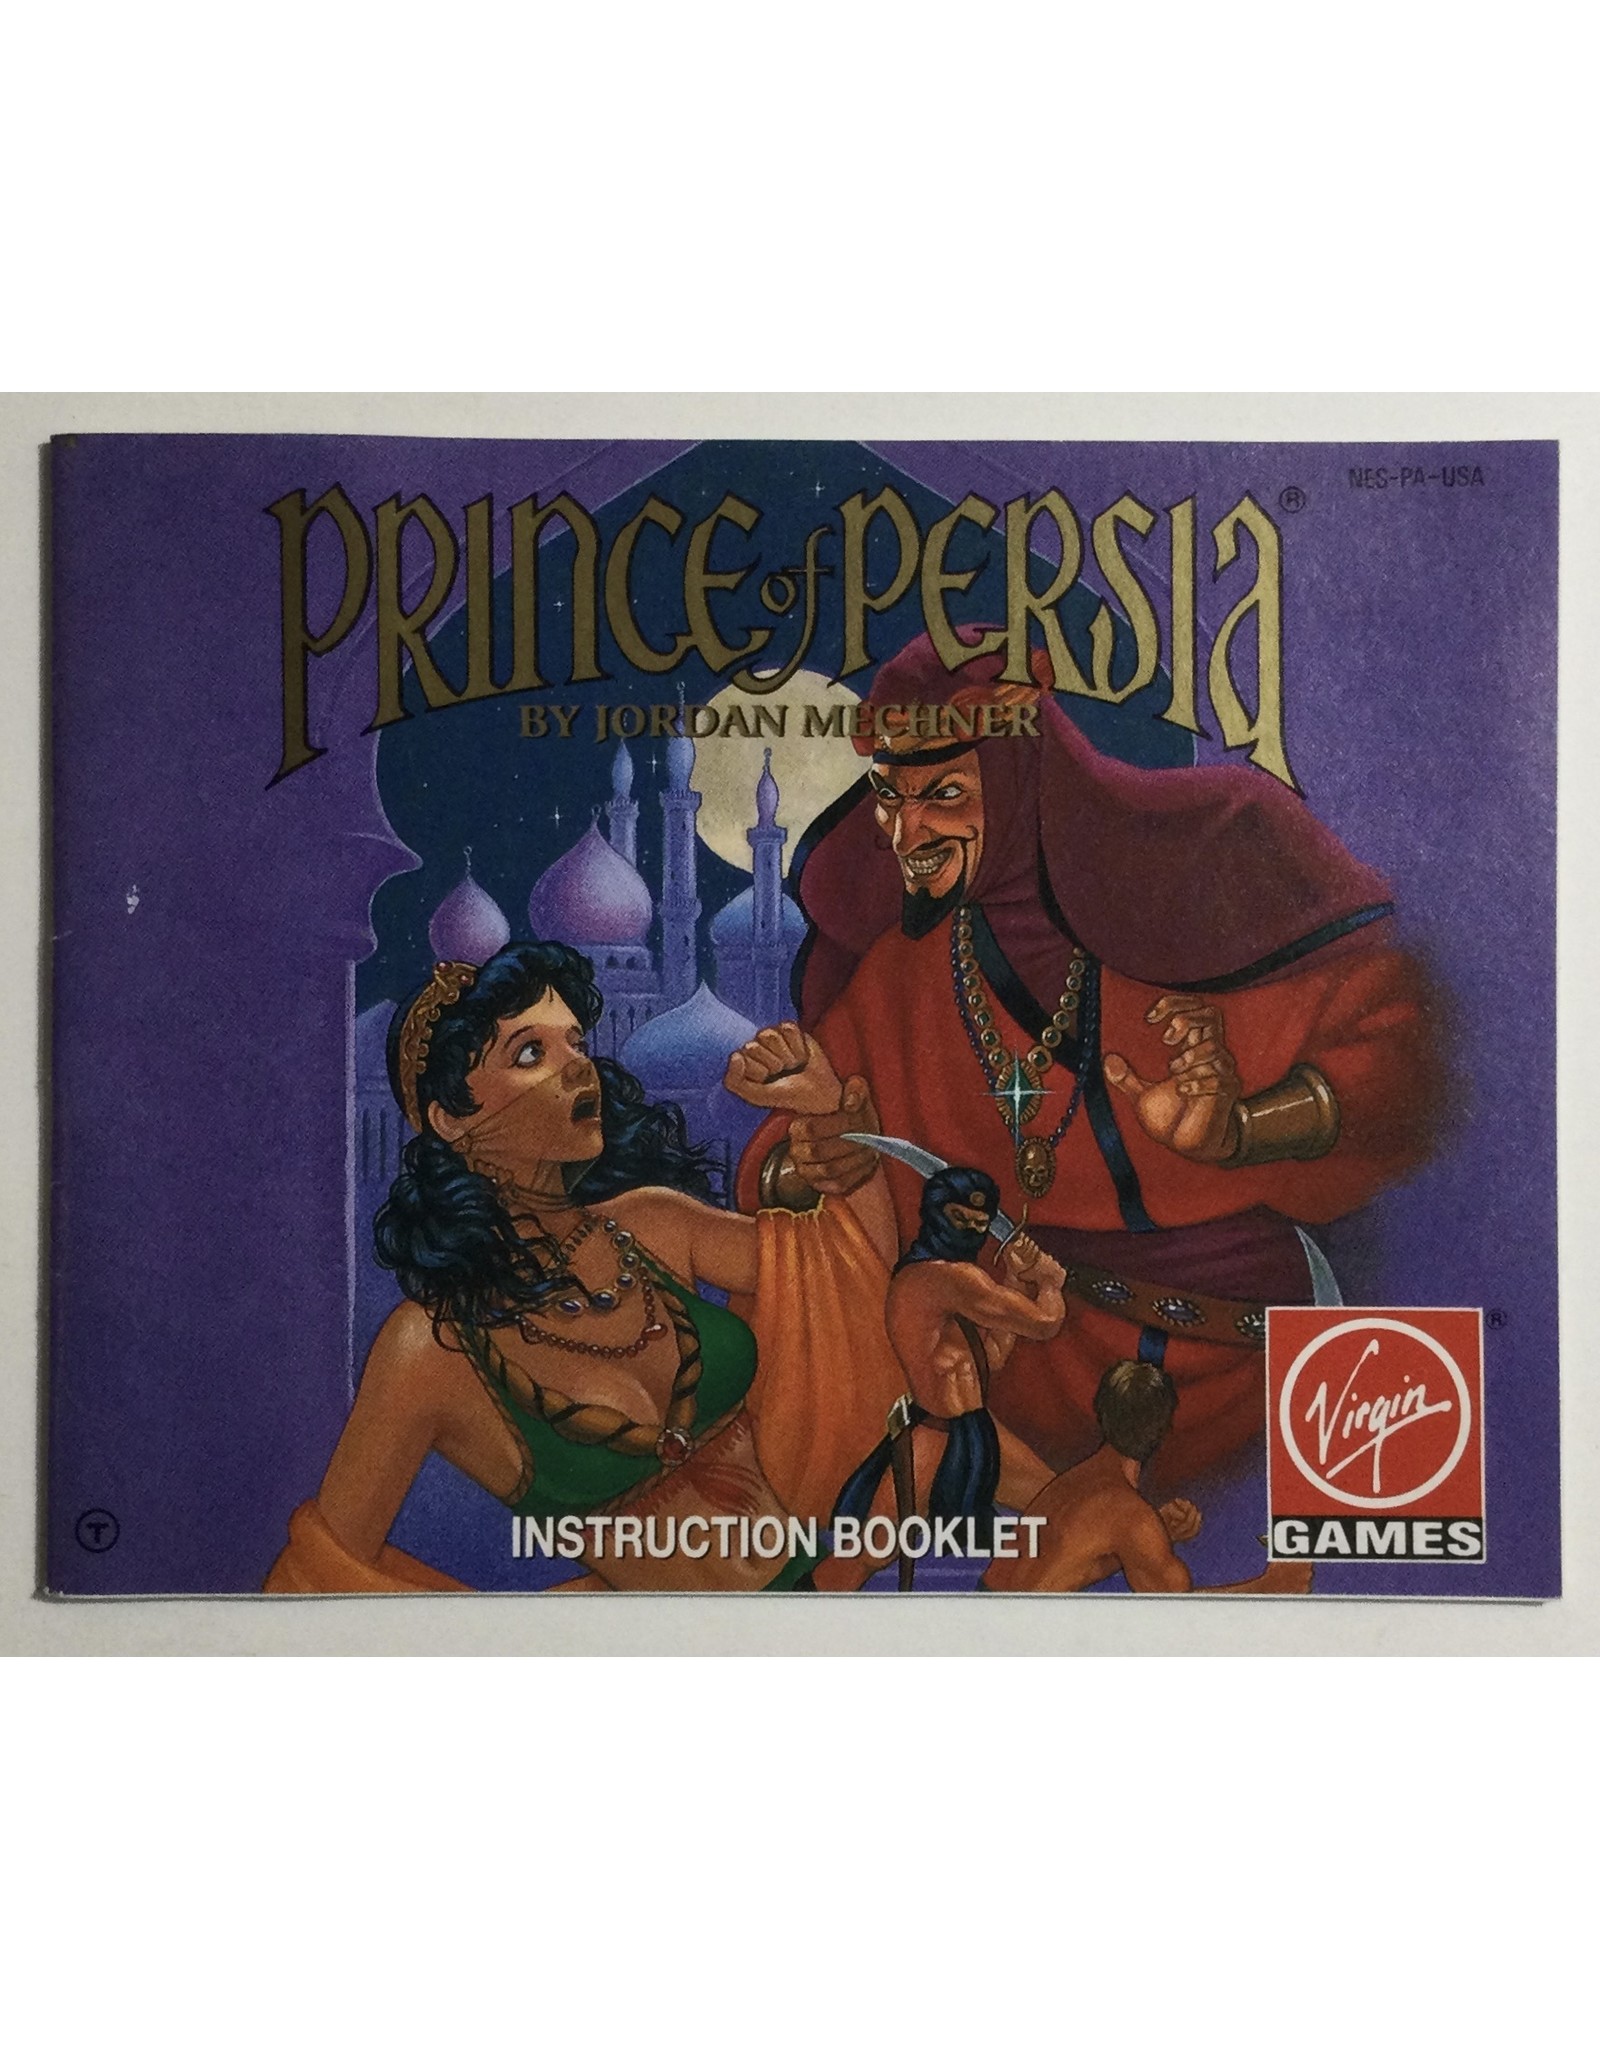 VIRGIN GAMES Prince of Persia for Nintendo Entertainment System (NES)